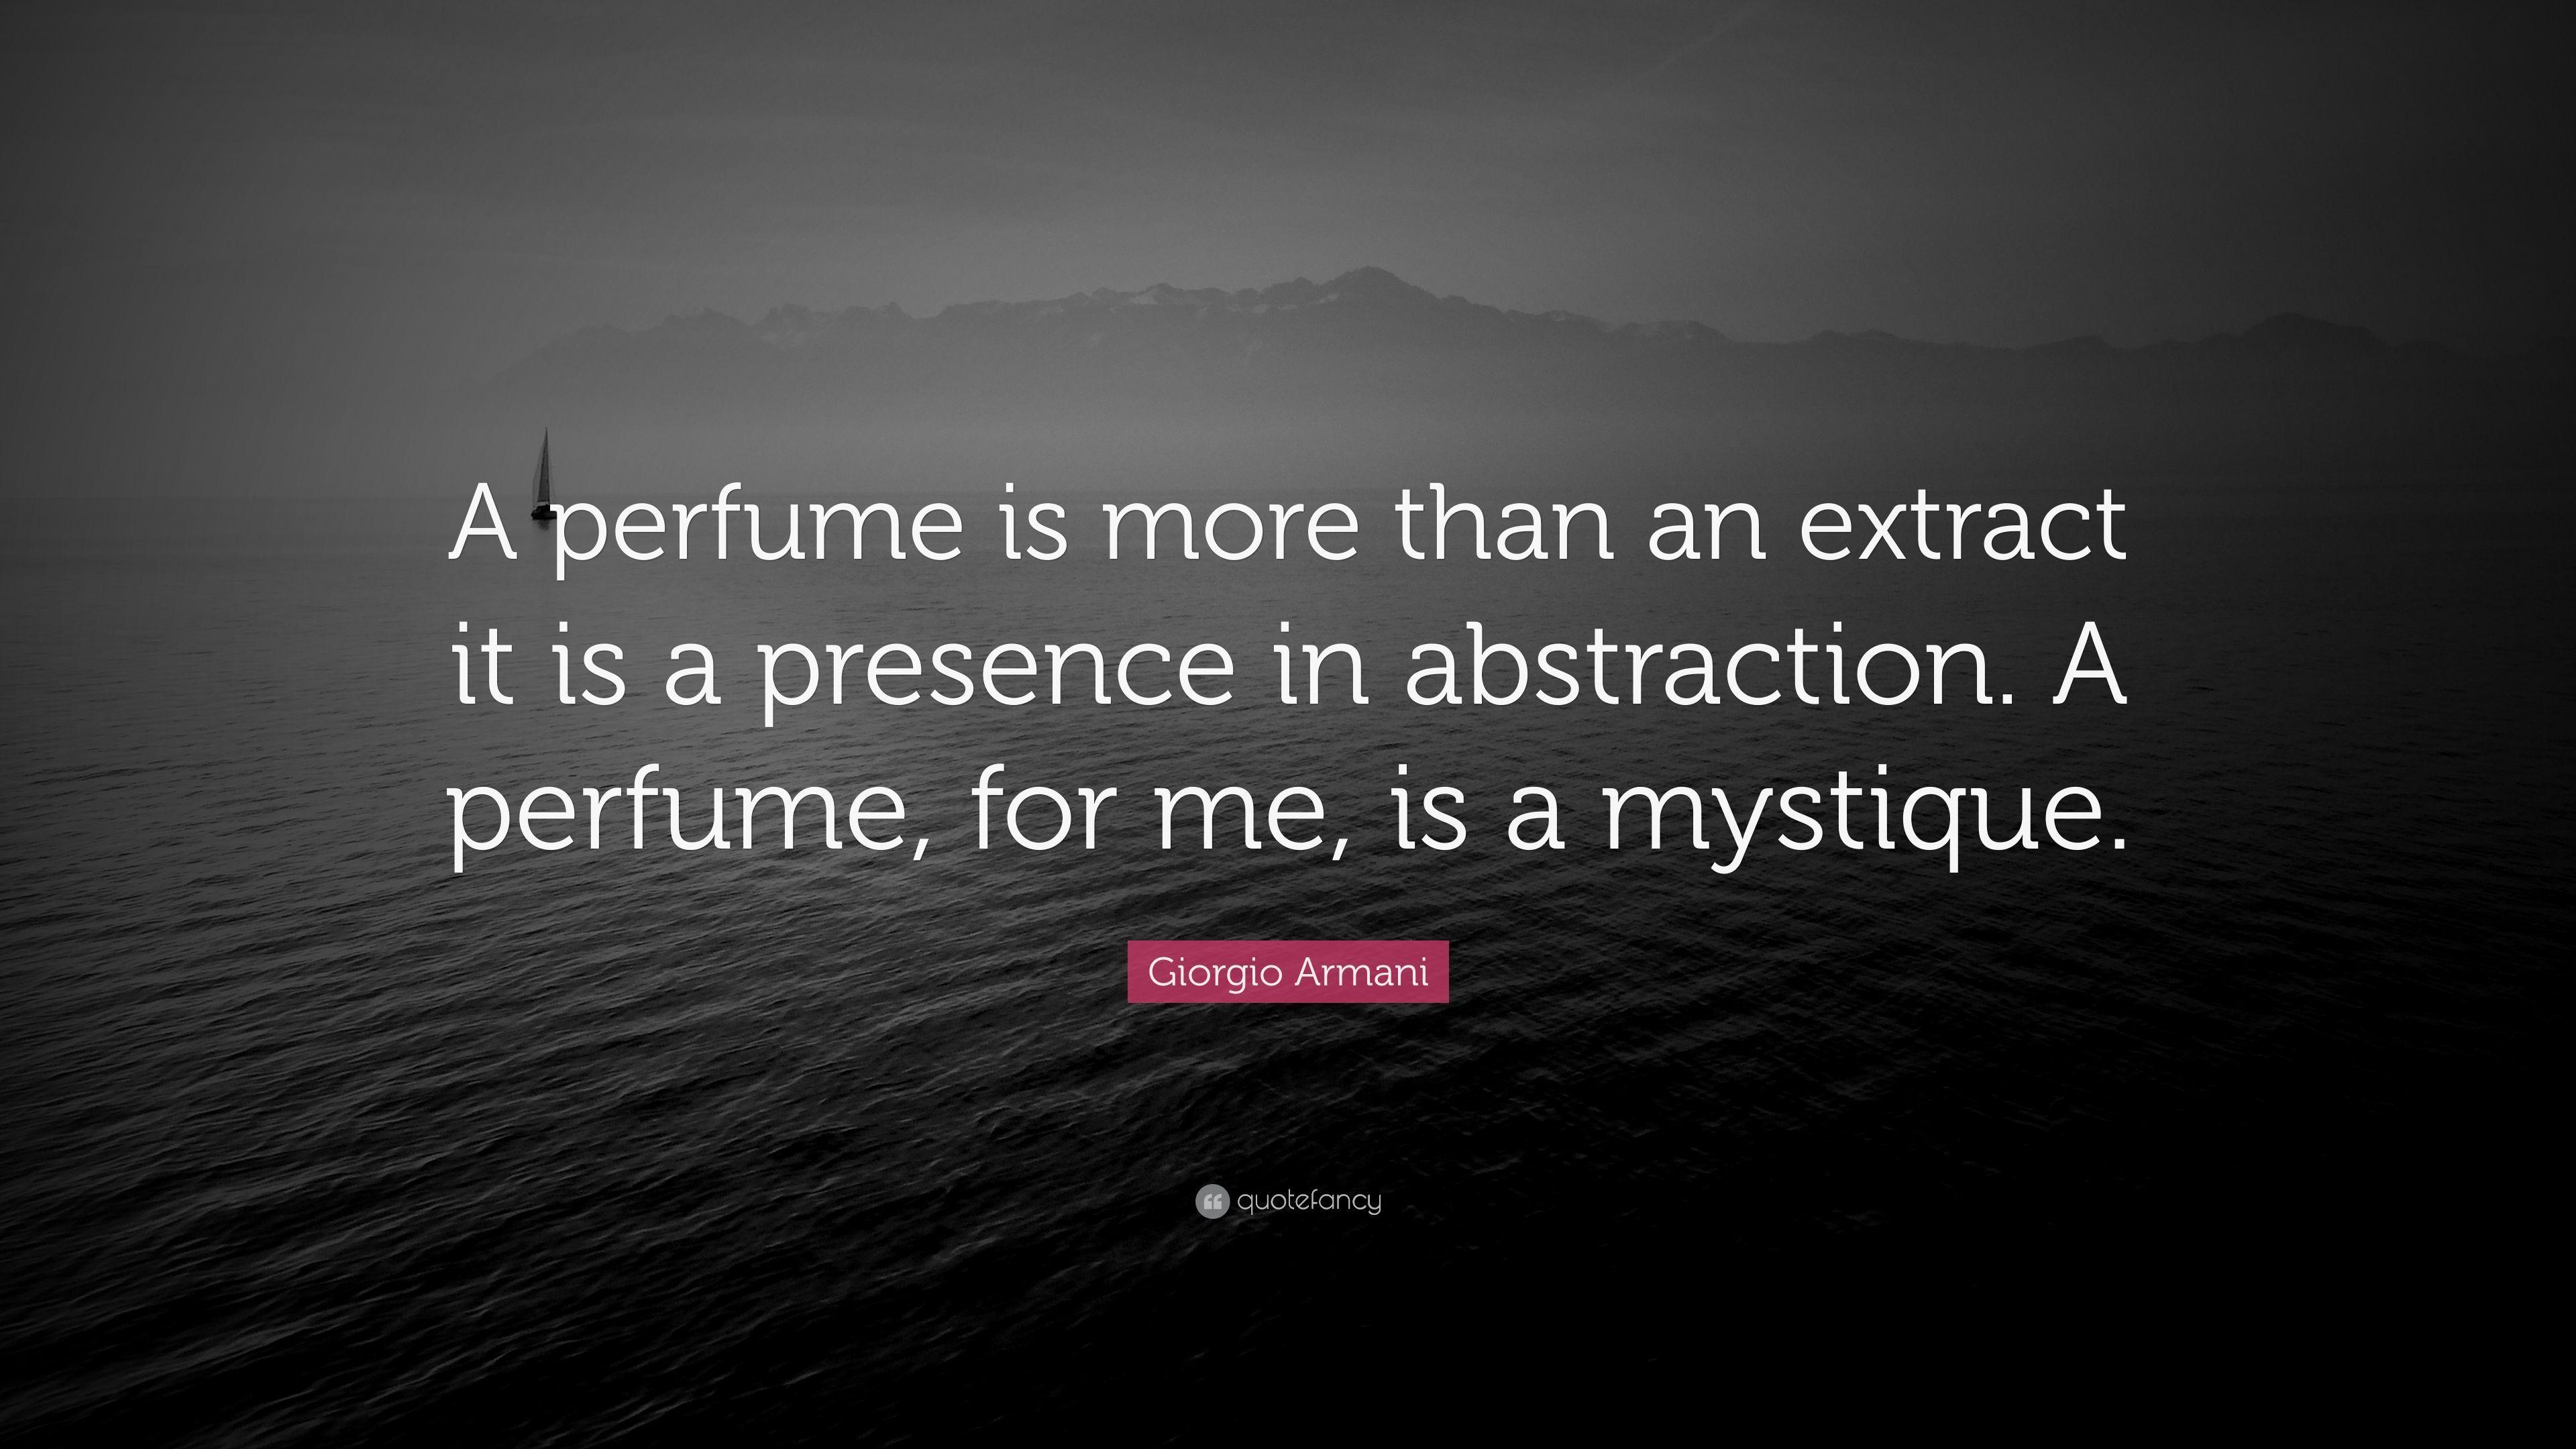 Giorgio Armani Quote: “A perfume is more than an extract it is a